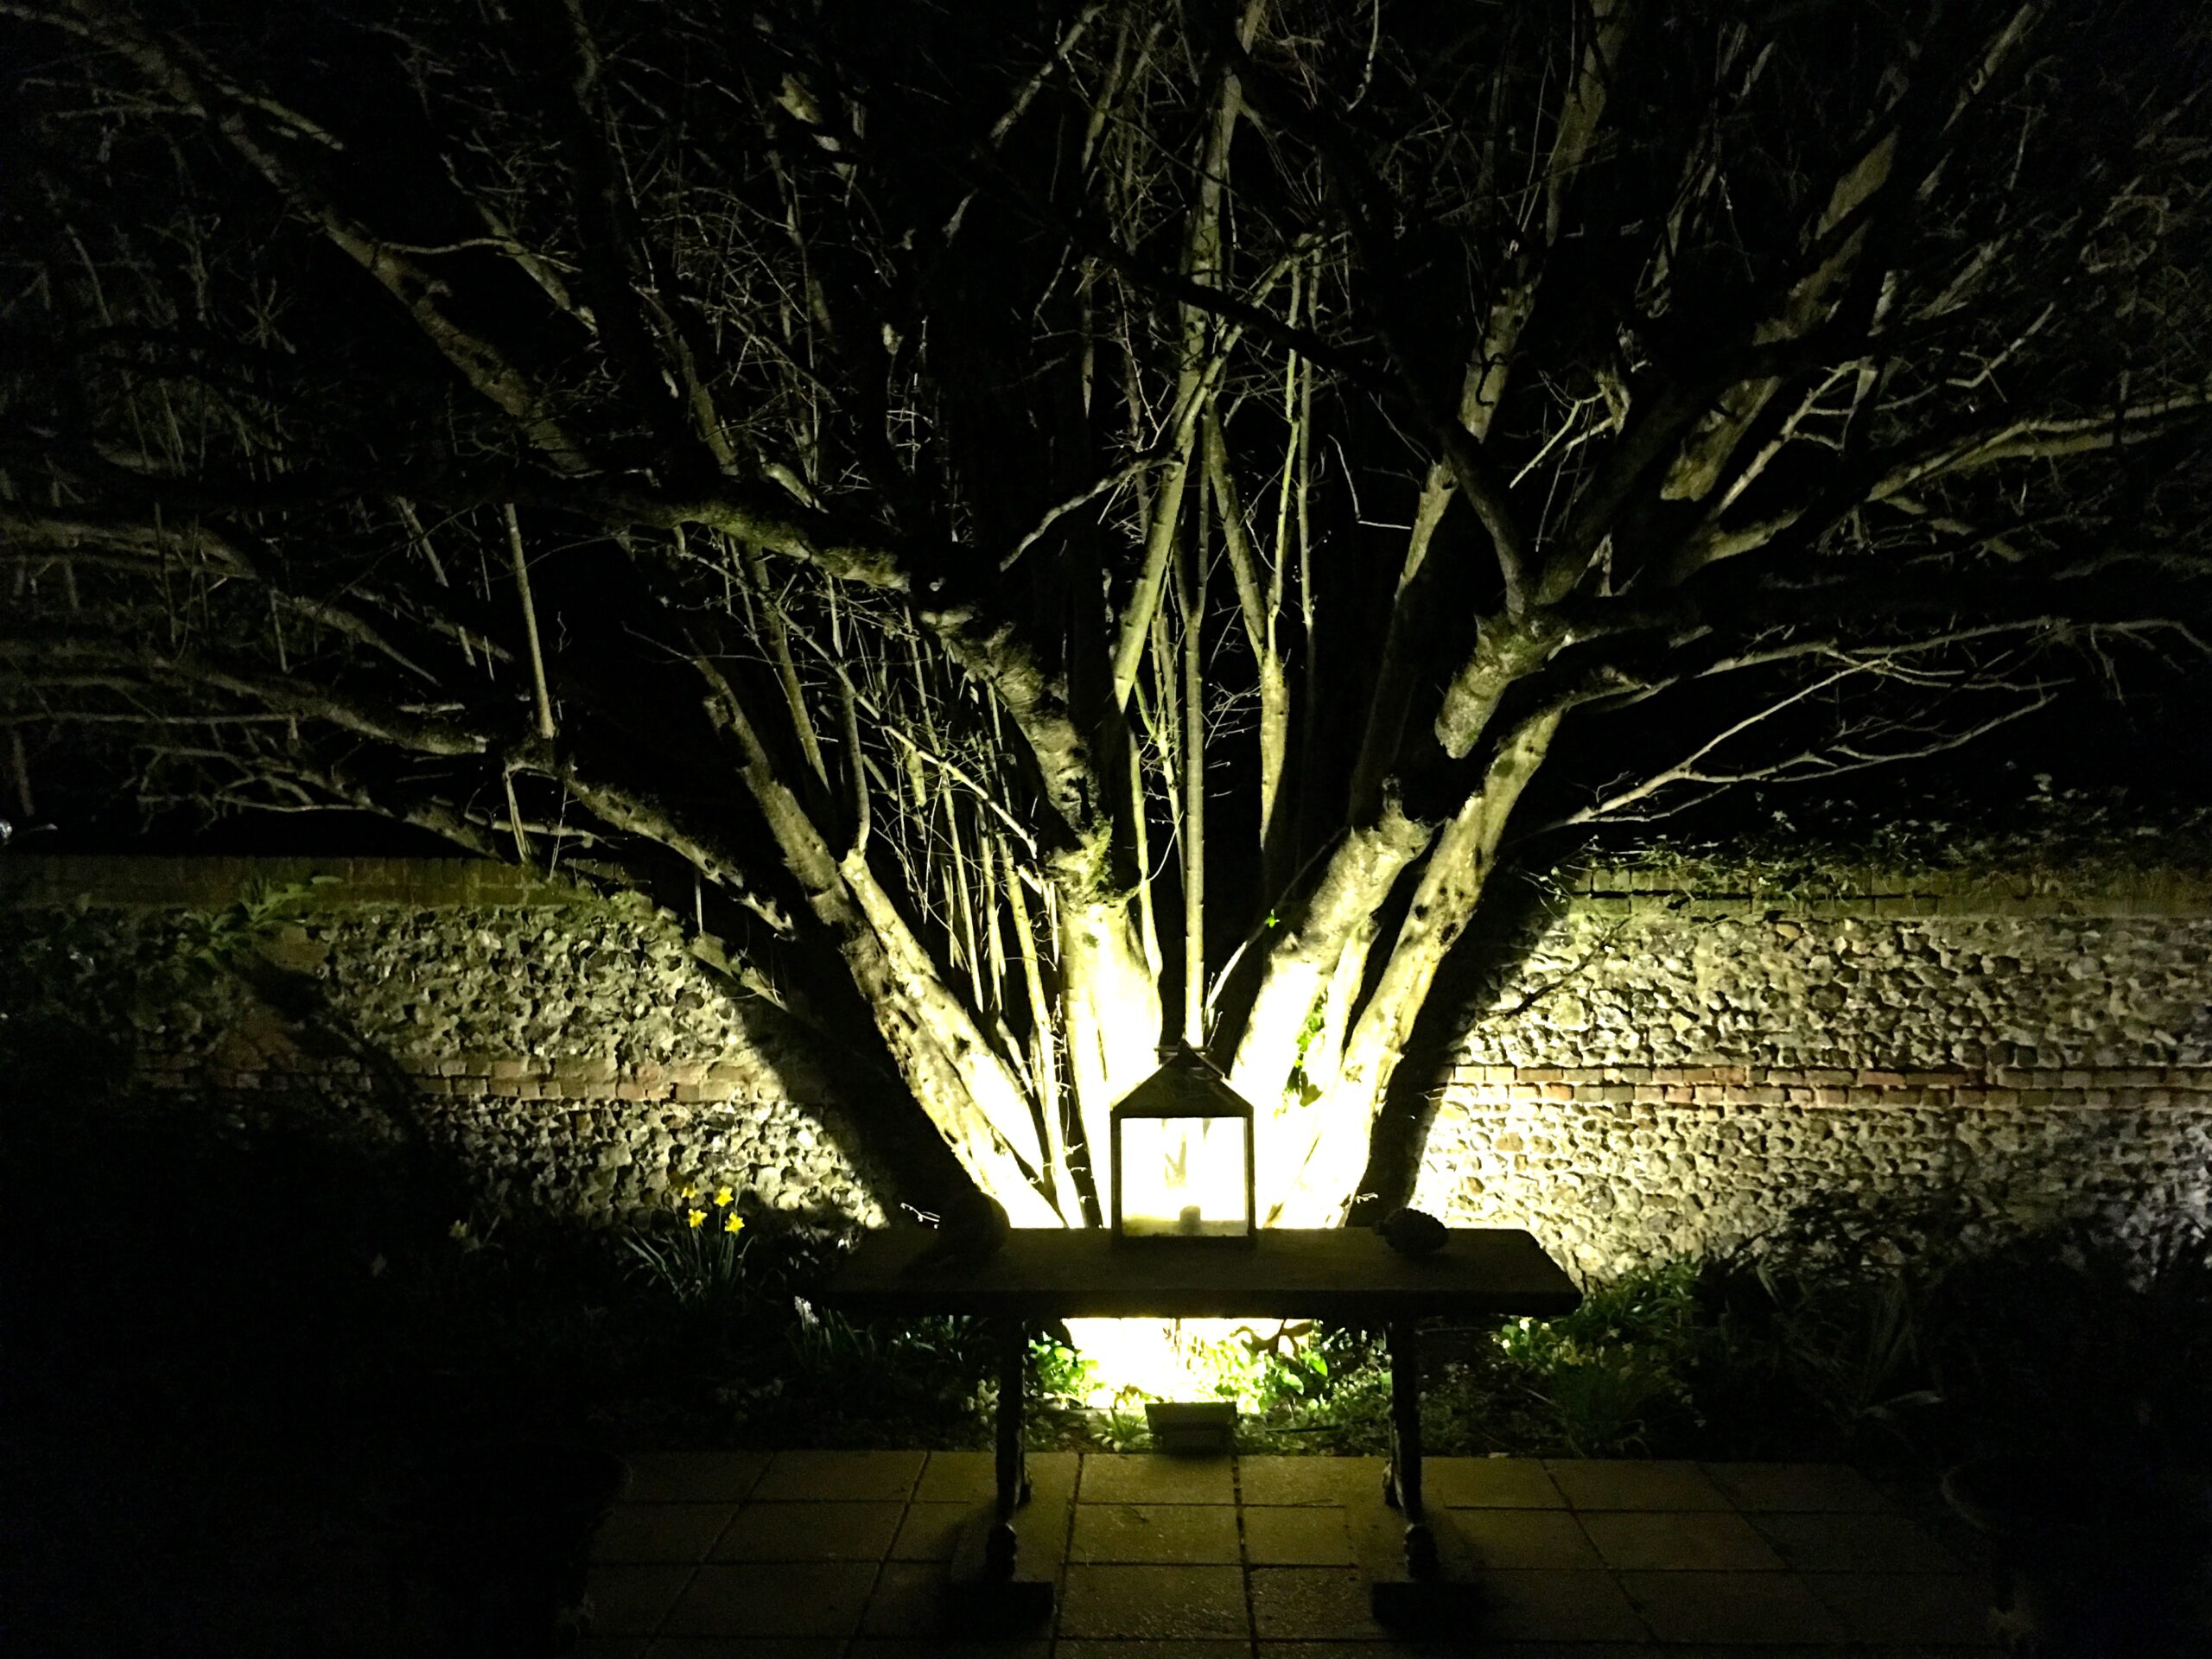 Image of a bench and tree illuminated by a lantern.